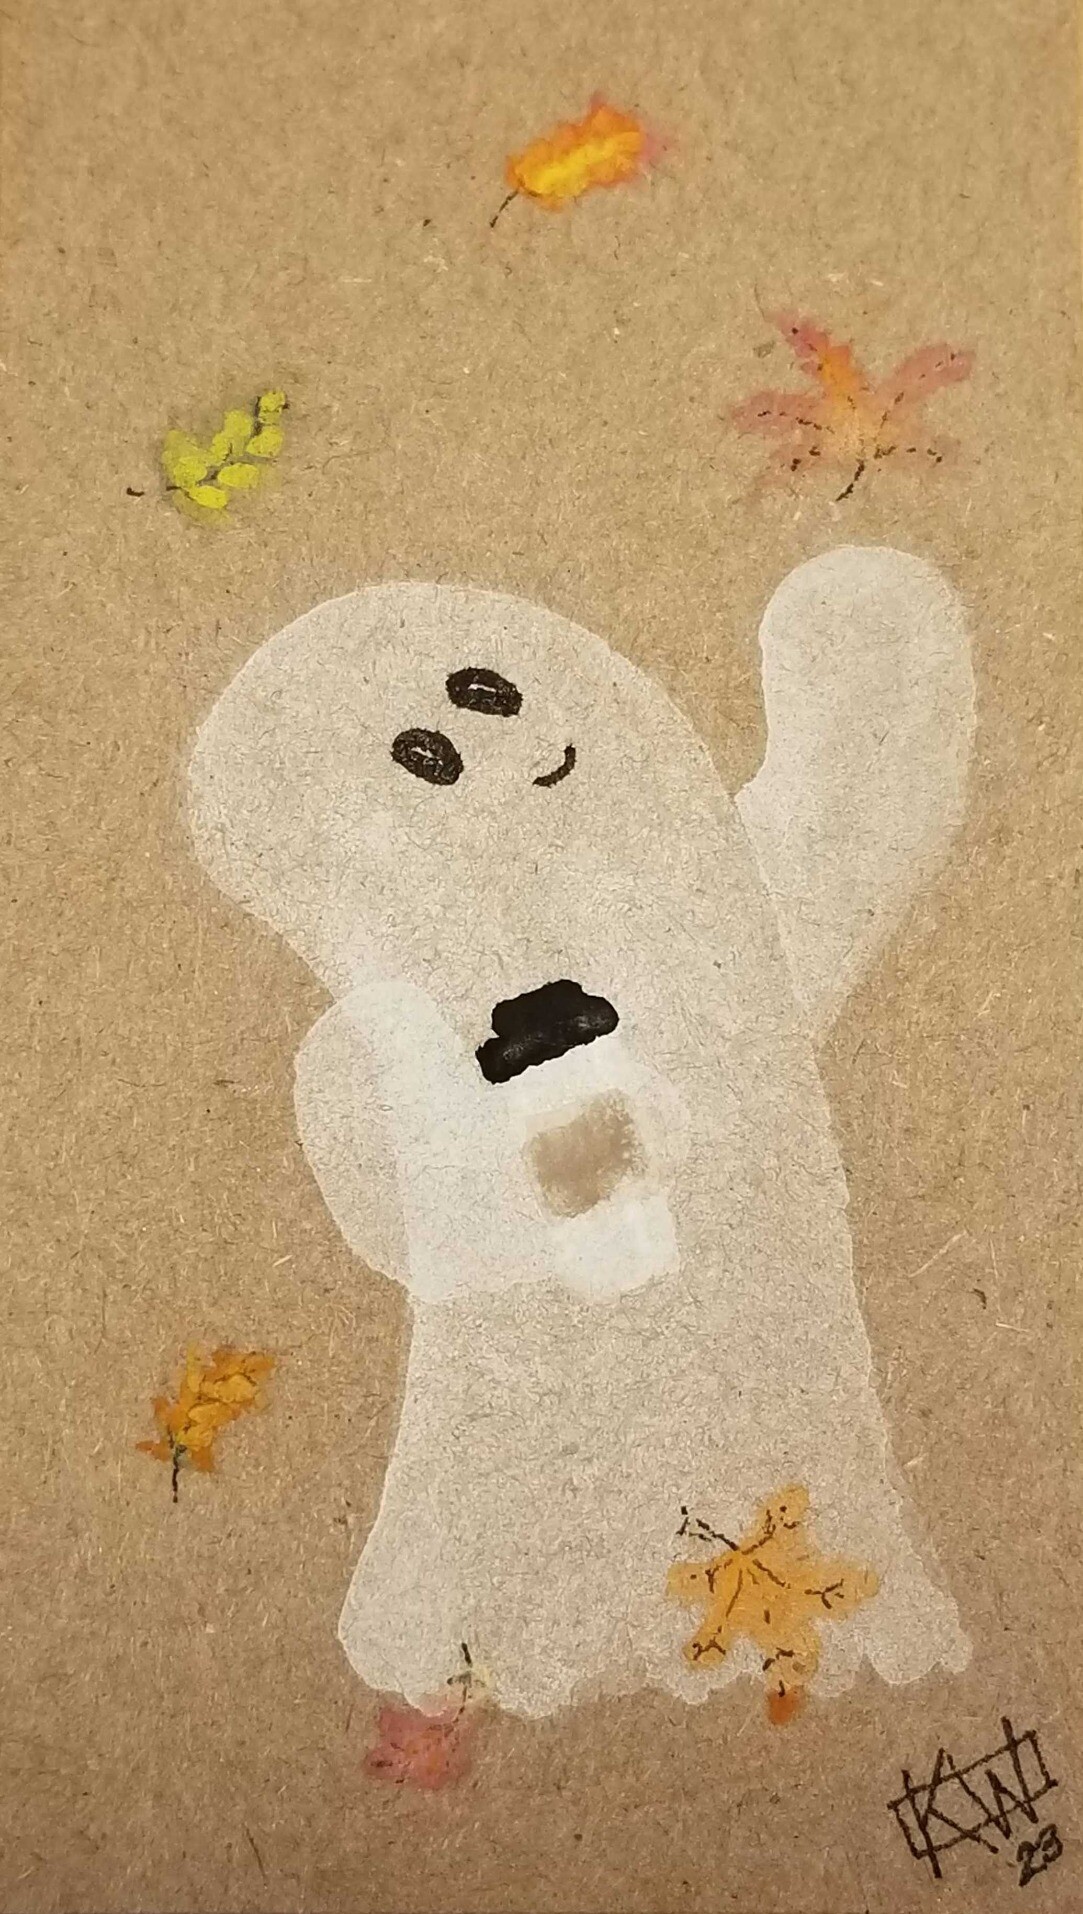 Paint & ink on cardboard. A happy ghost is holding a coffee & reaching out toward a falling leaf. Other leaves swirl around, in the air & on the ground.